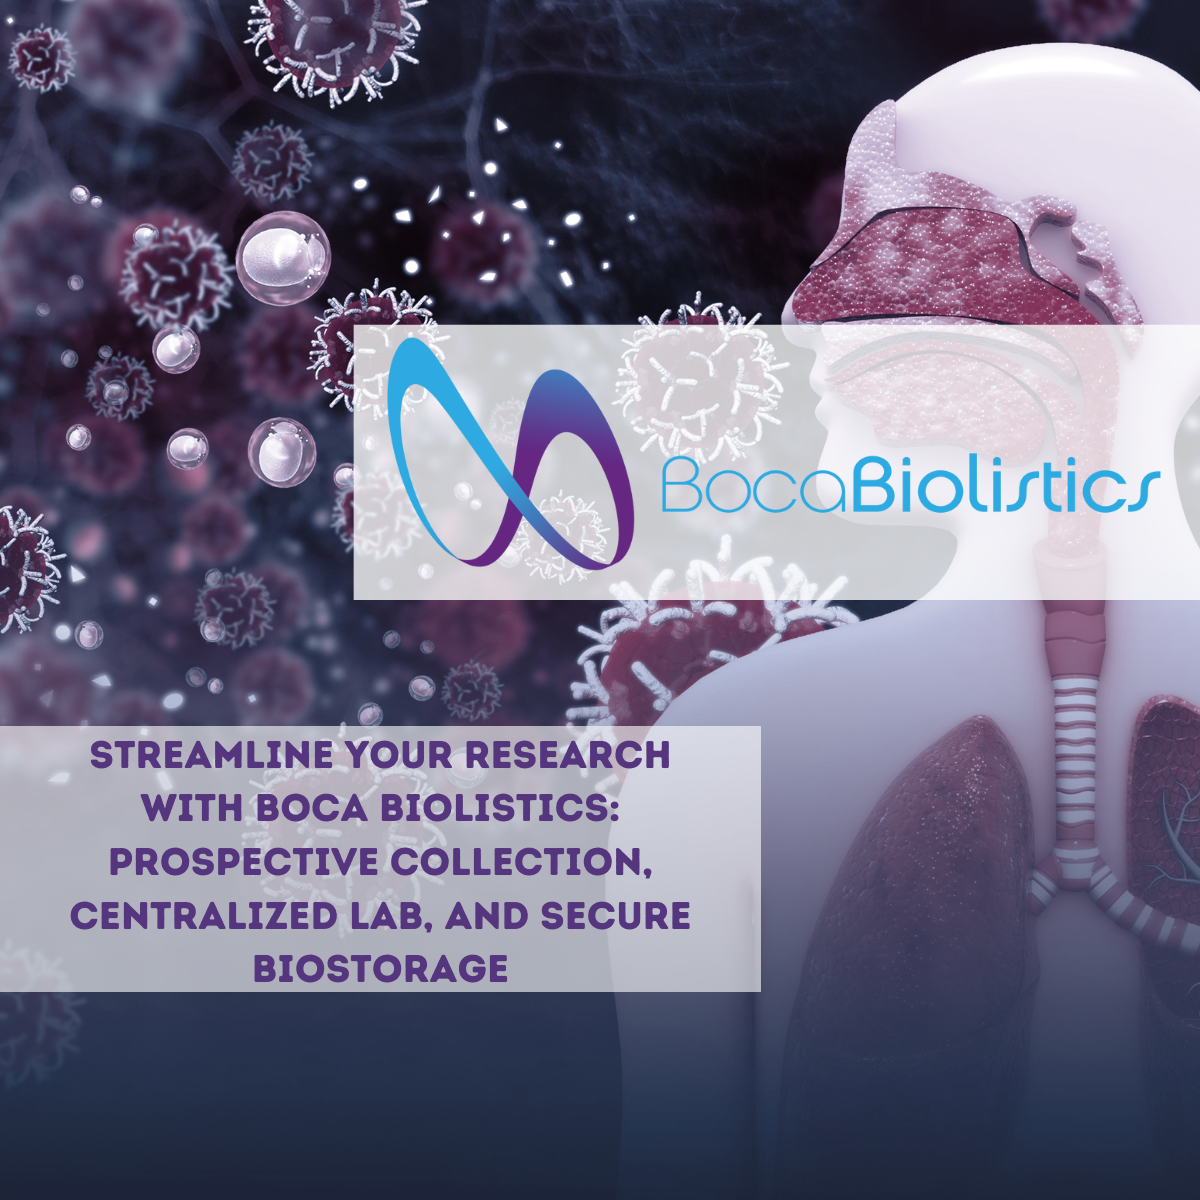 Streamline Your Research with Boca Biolistics: Prospective Collection, Centralized Labs, and Secure Biostorage